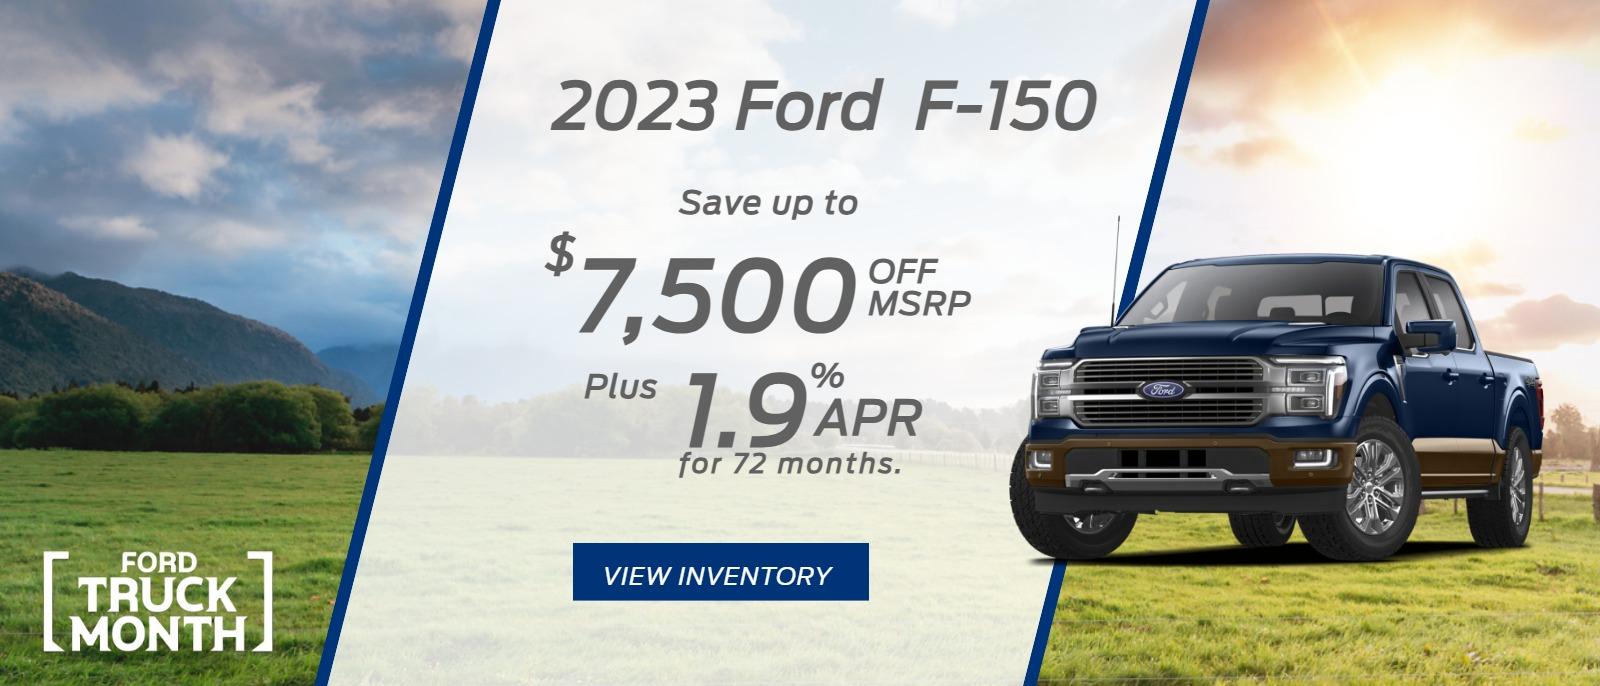 Save up to $7,500 OFF MSRP - Plus 1.9% APR for 72 months.